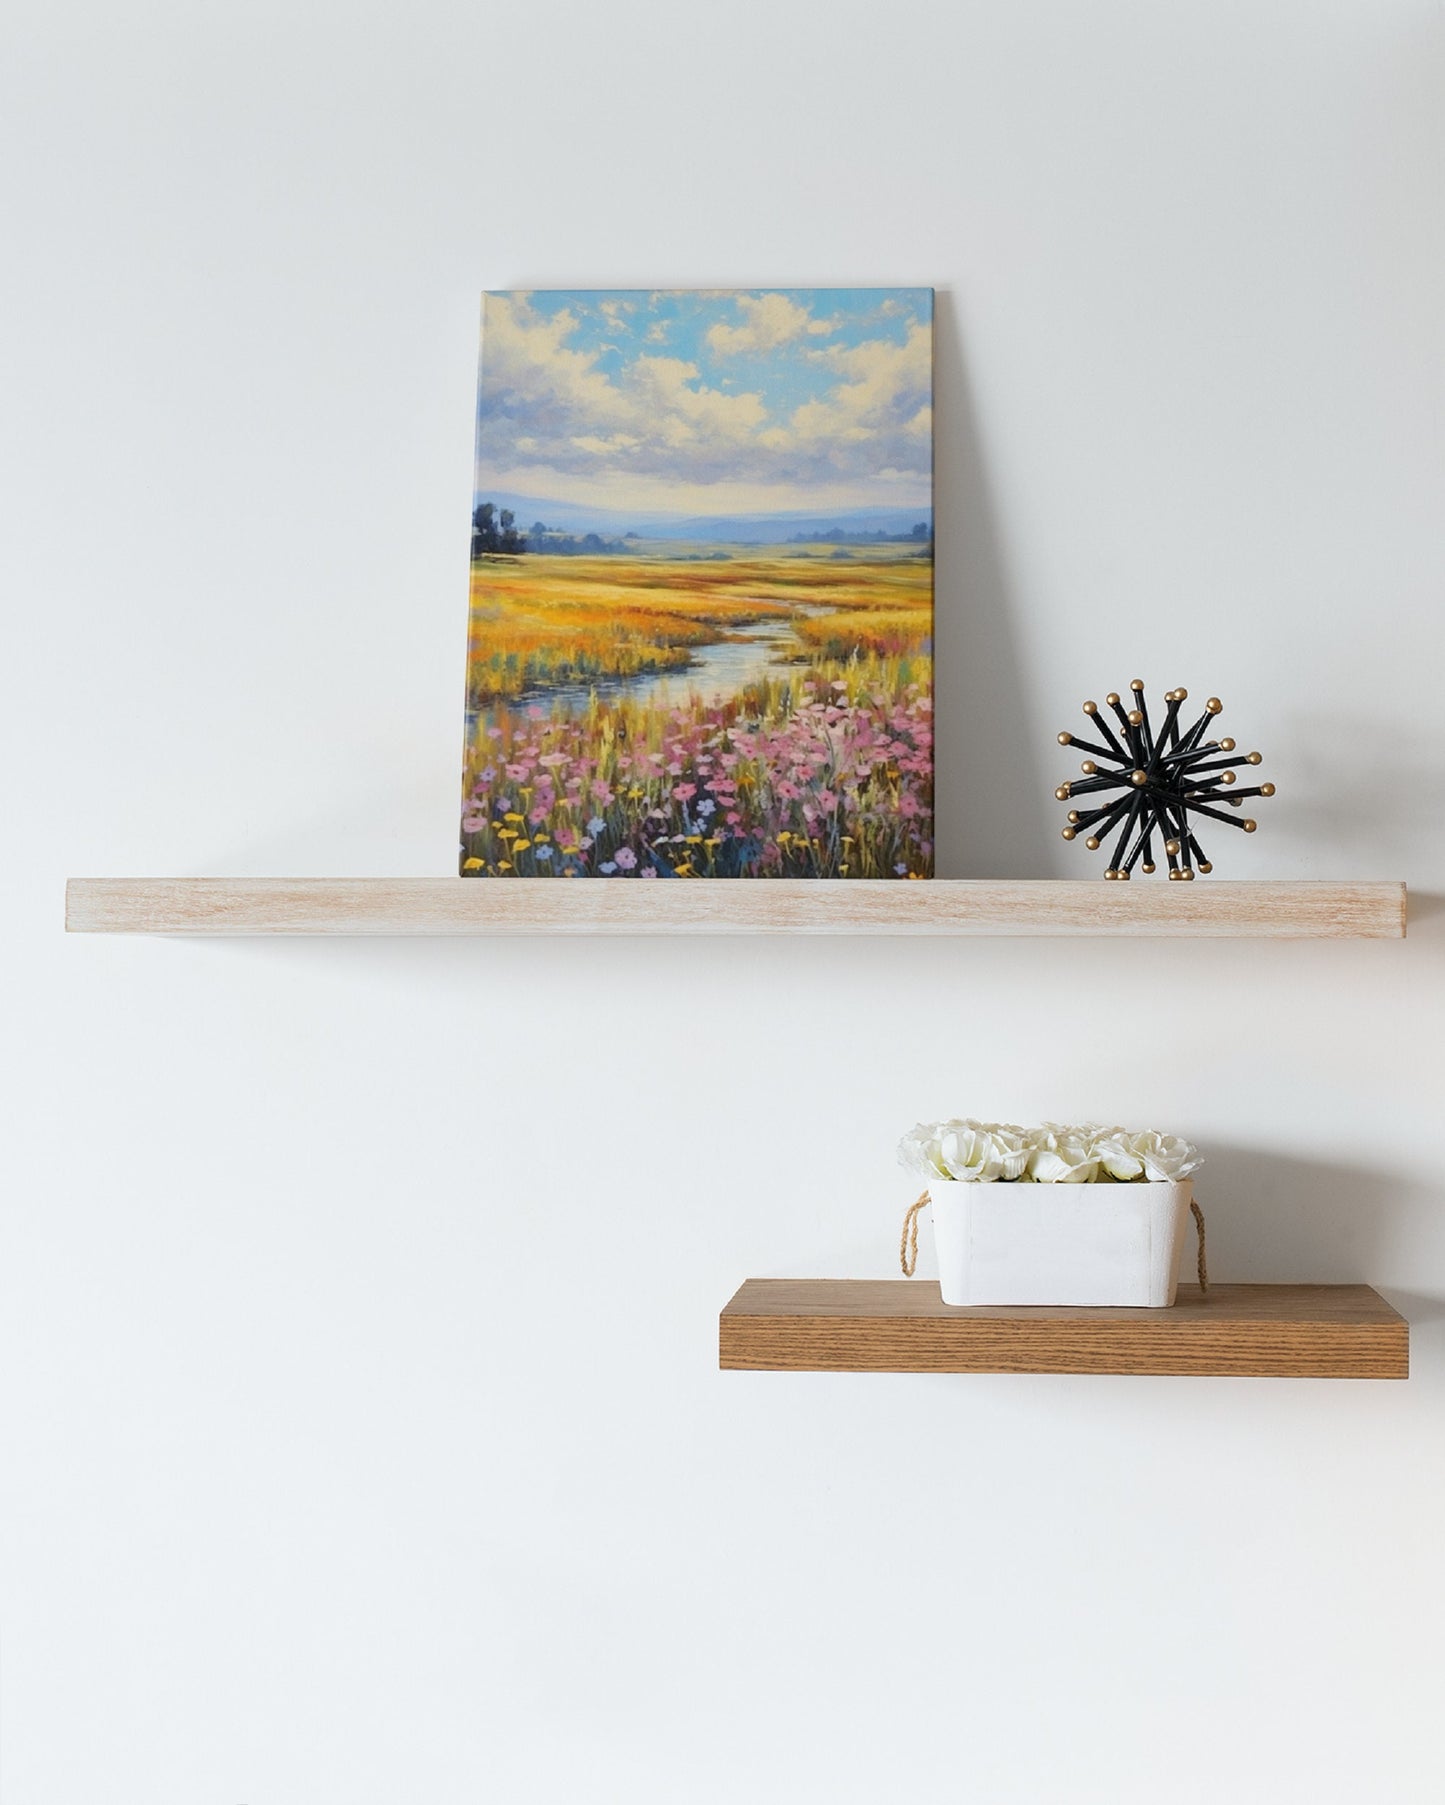 Farmhouse & Floral Wall Decor Must-Have-Contemporary and Minimalist Botanical Wall Art with Wildflower Art Print on Canvas and Wooden Frame